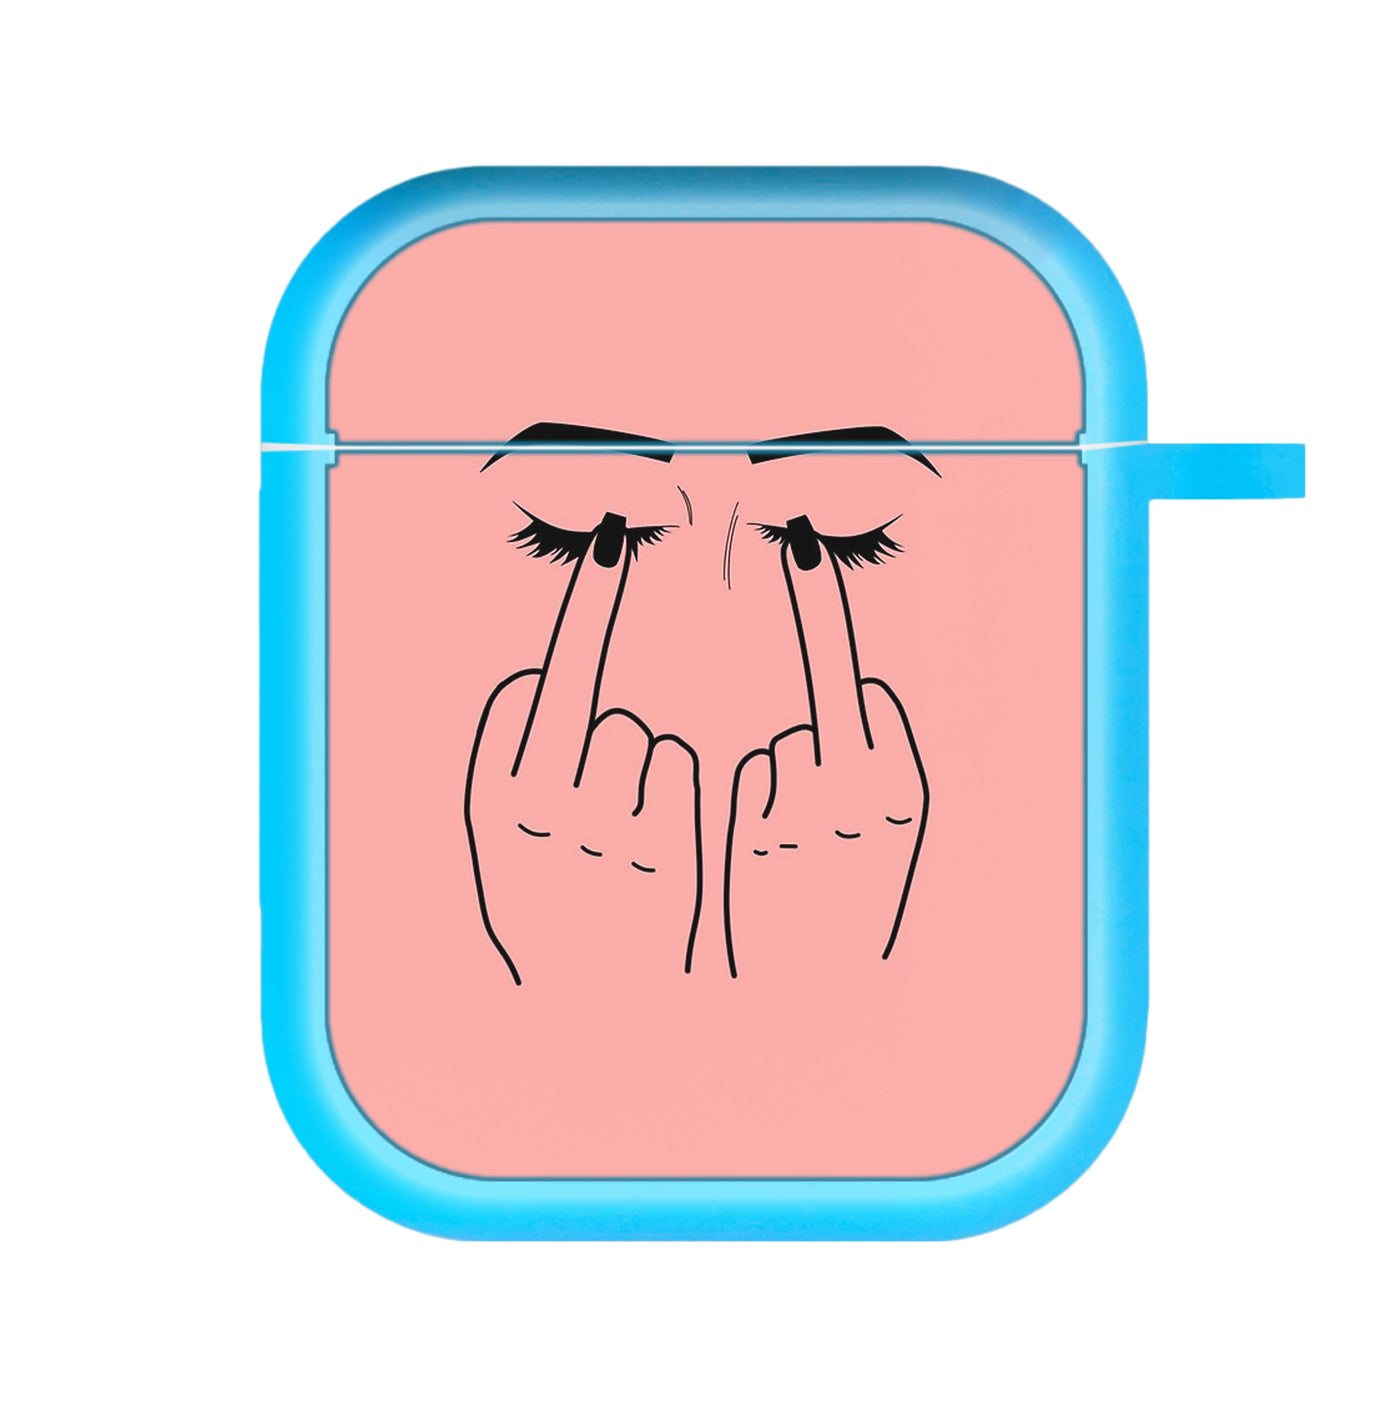 Middle Finger Eyes AirPods Case